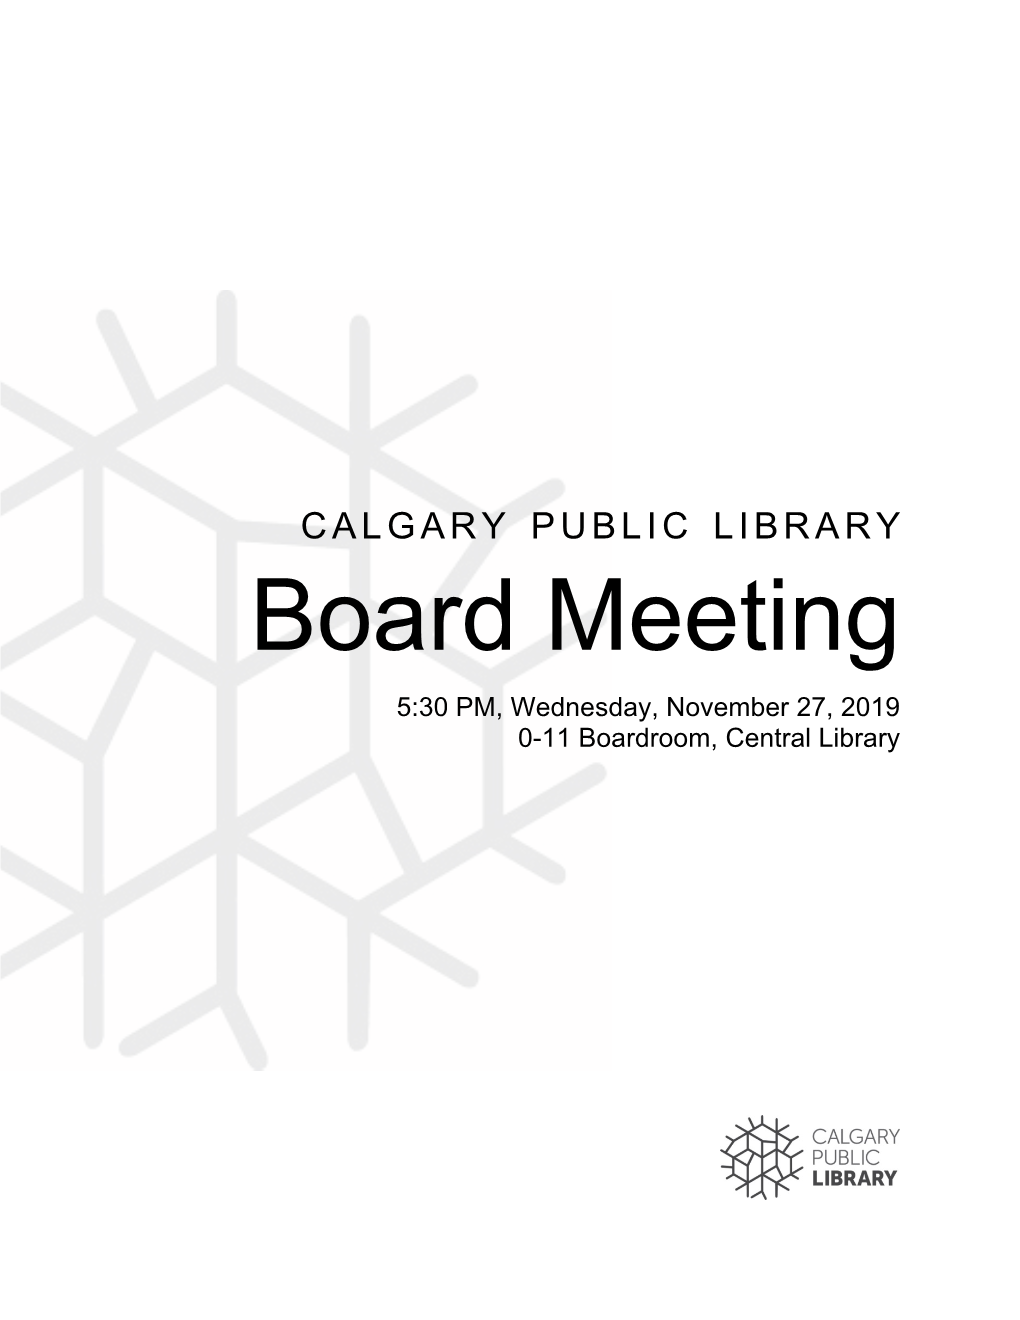 Board Meeting 5:30 PM, Wednesday, November 27, 2019 0-11 Boardroom, Central Library